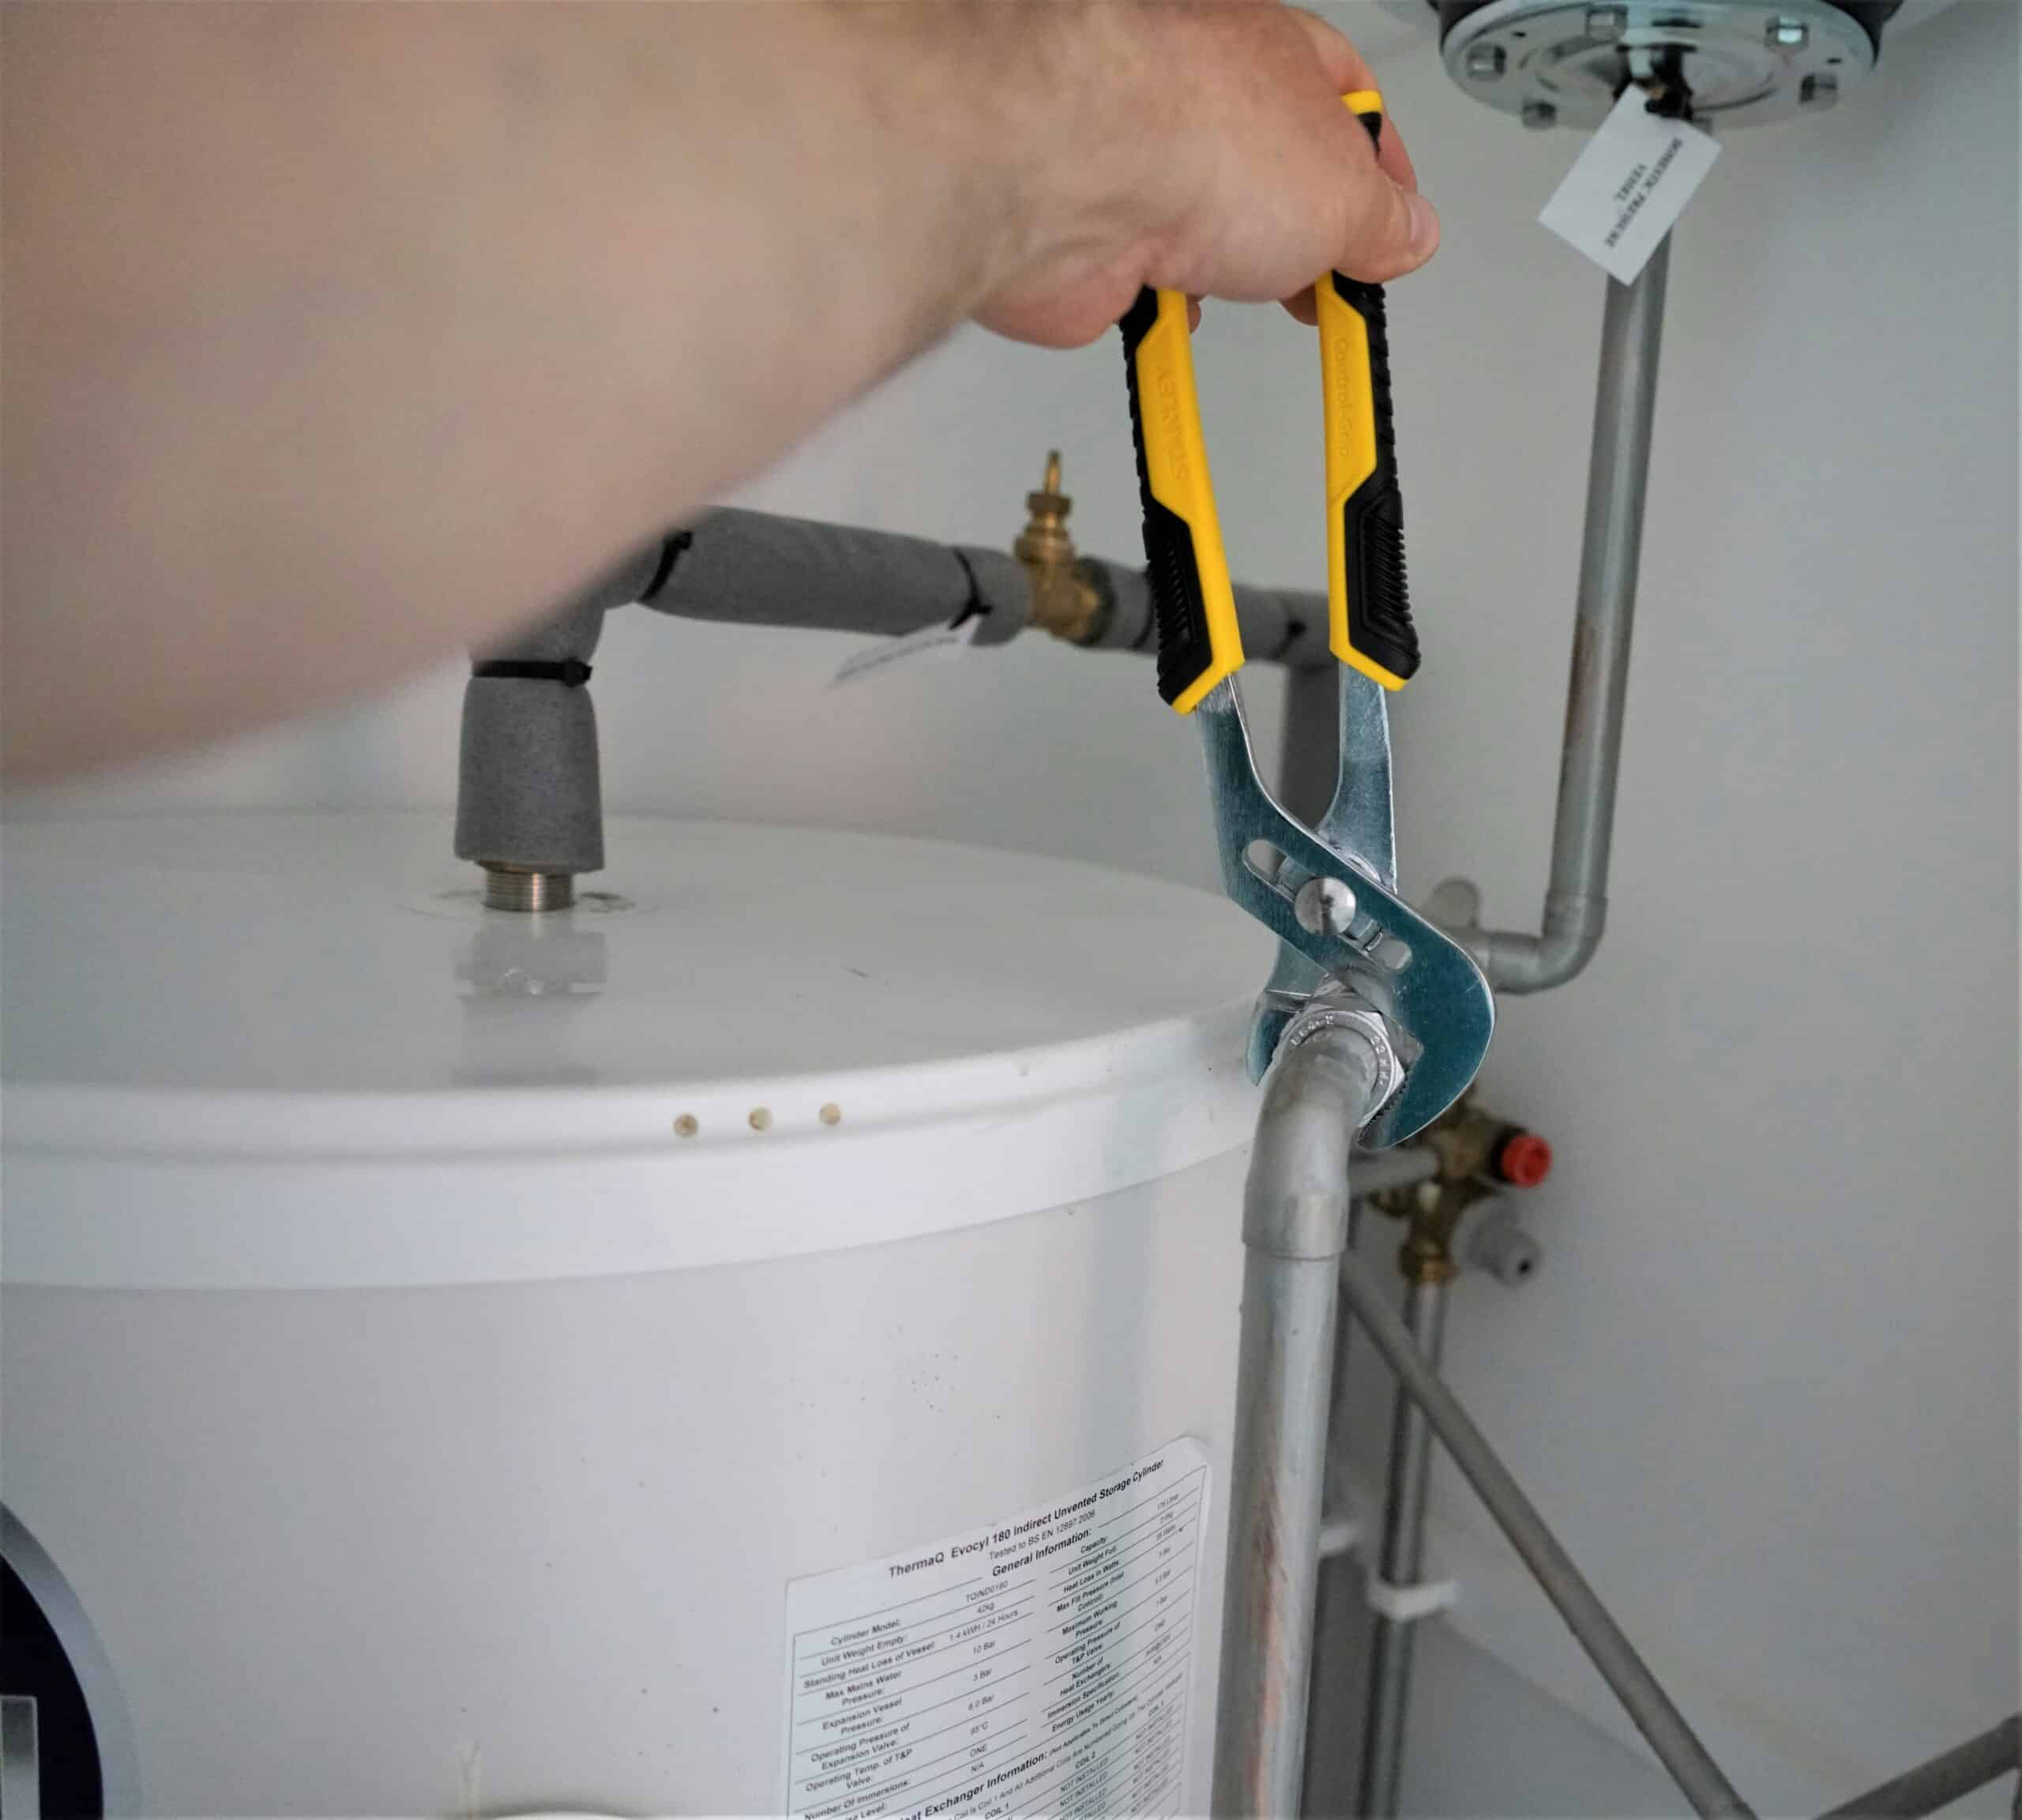 Tax deductible tankless water heater upgrade in progress by Arizona's Dukes of Air